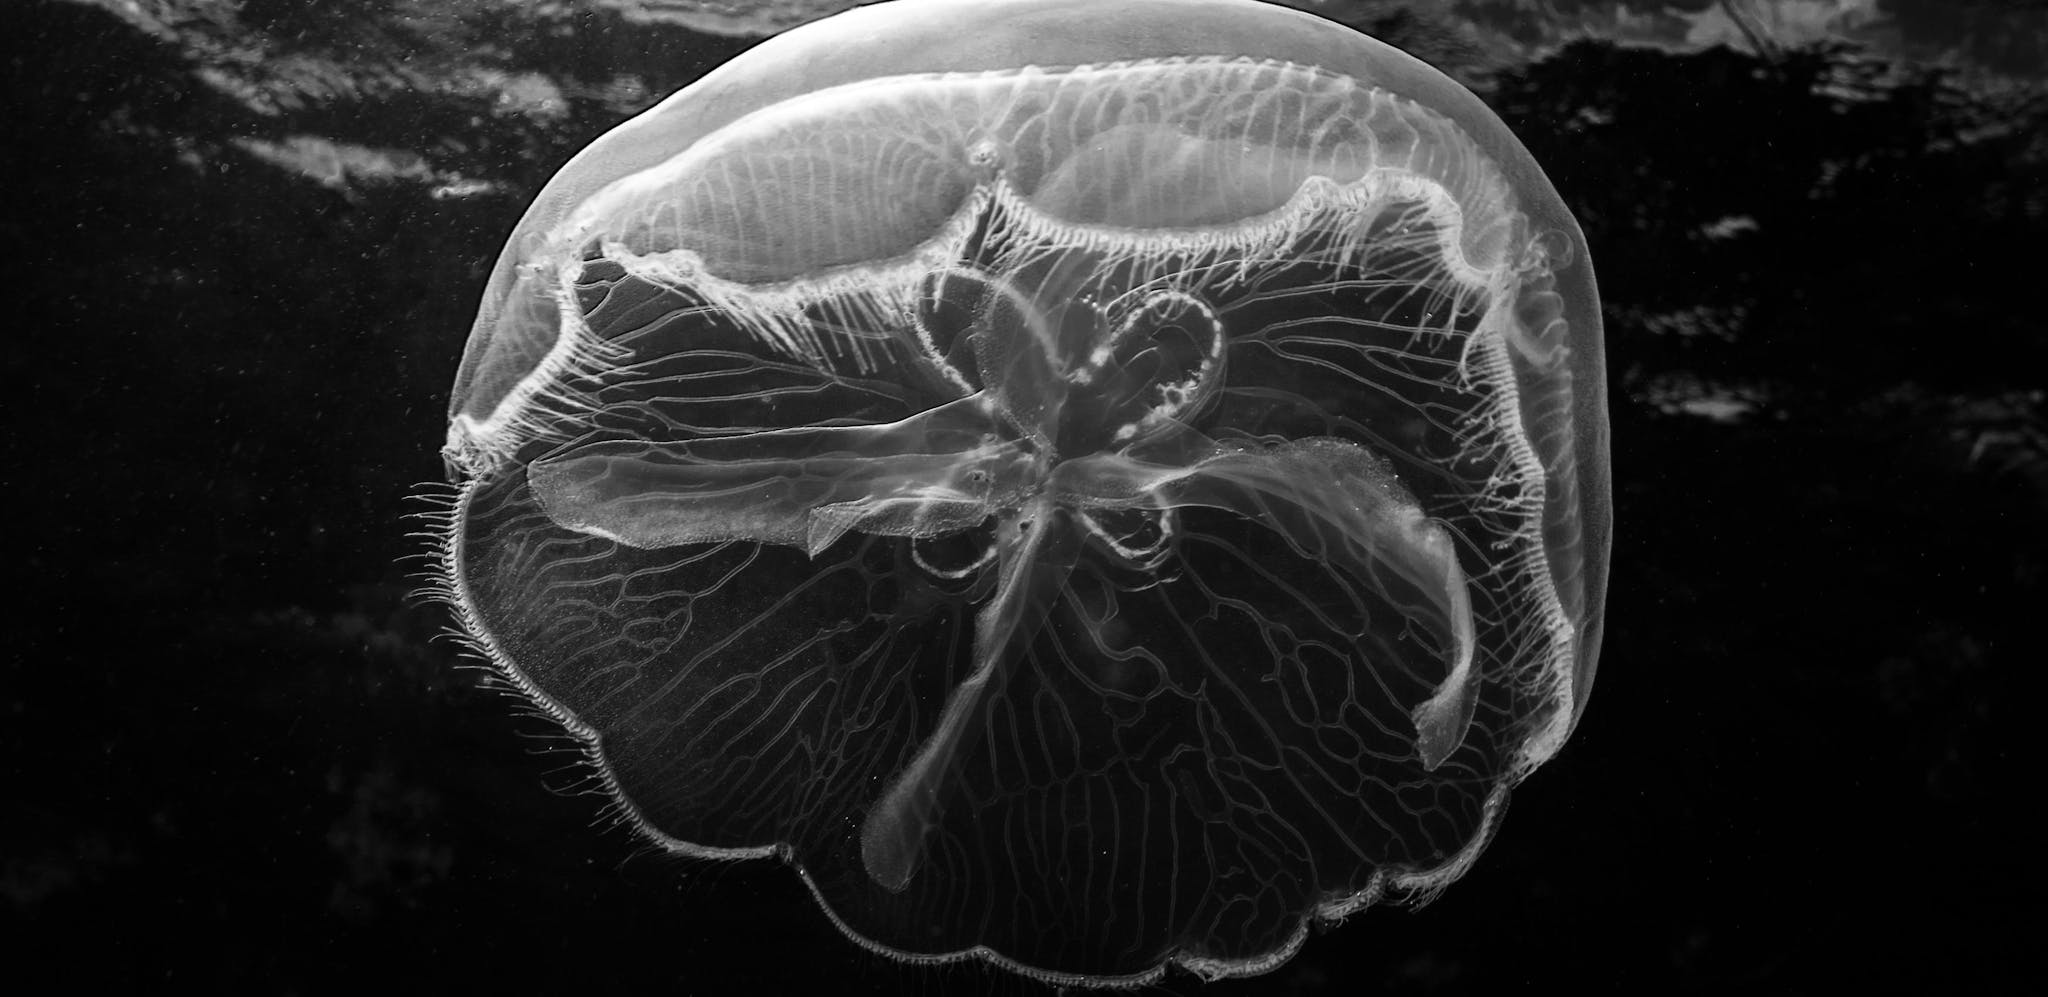 A clear jellyfish, monochrome image